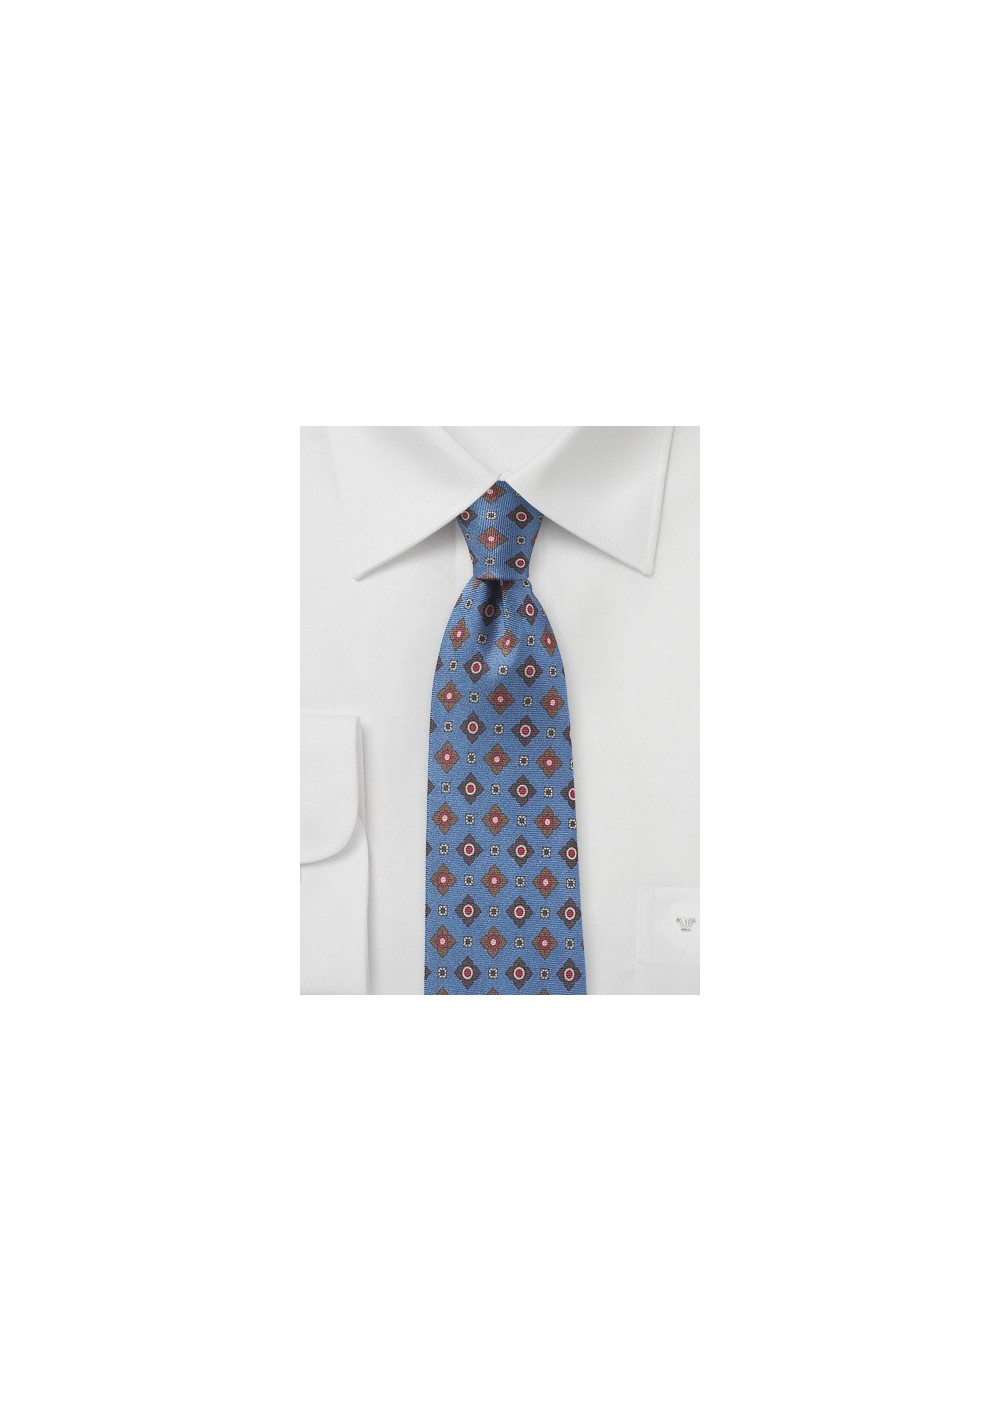 Vintage Medallion Print Tie in French Blue